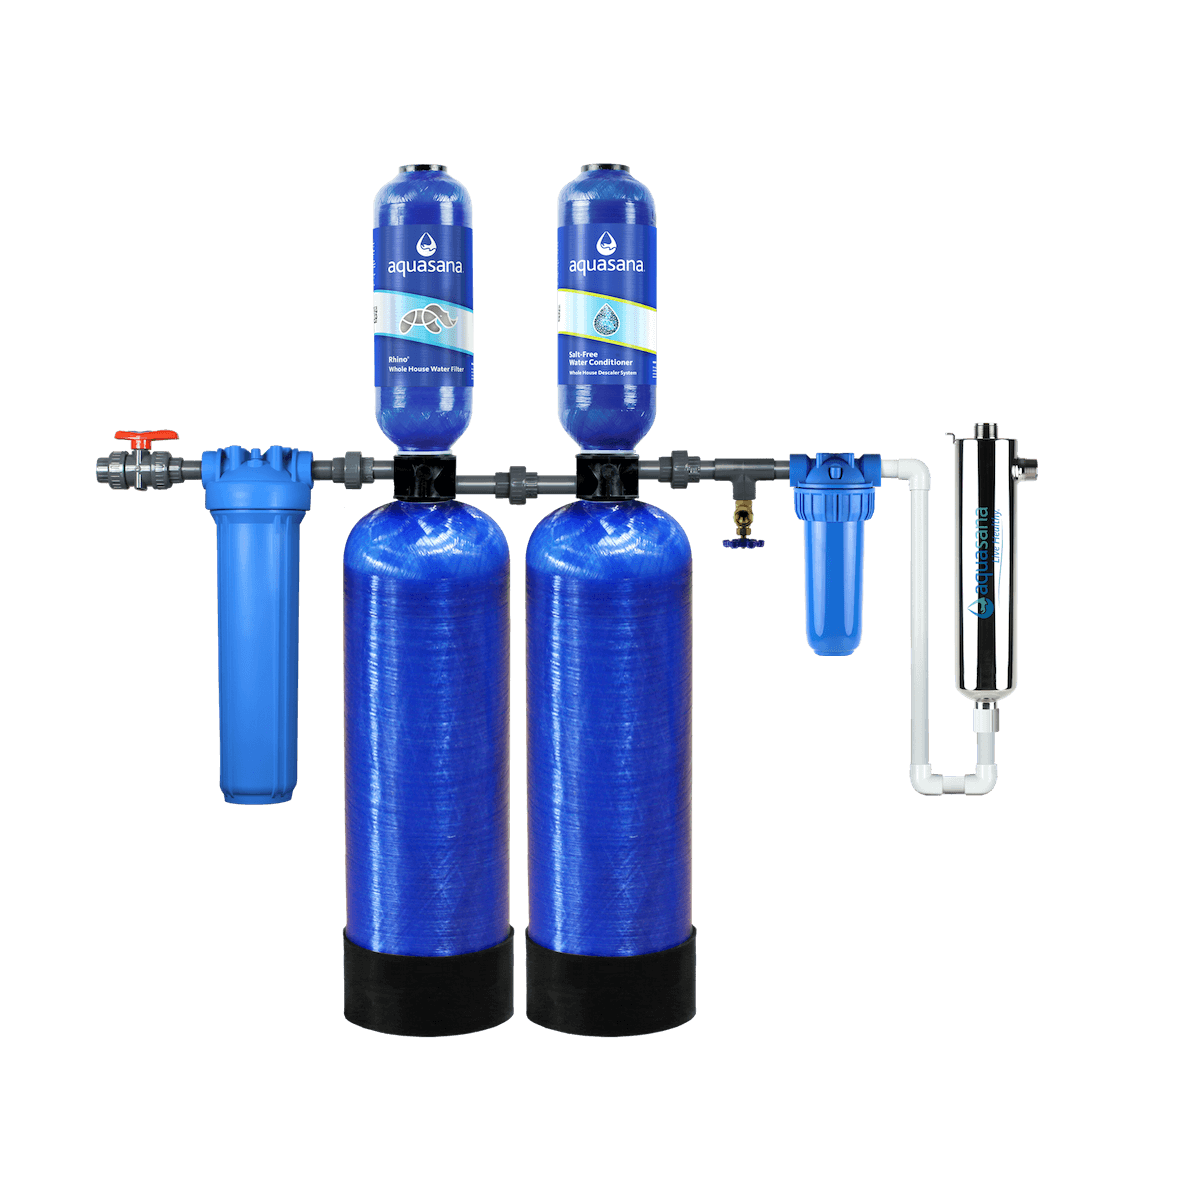 Rhino® Chloramines Whole House Water UV Filter System Home Water Filtration Removes 99% of Bacteria & Viruses Aquasana